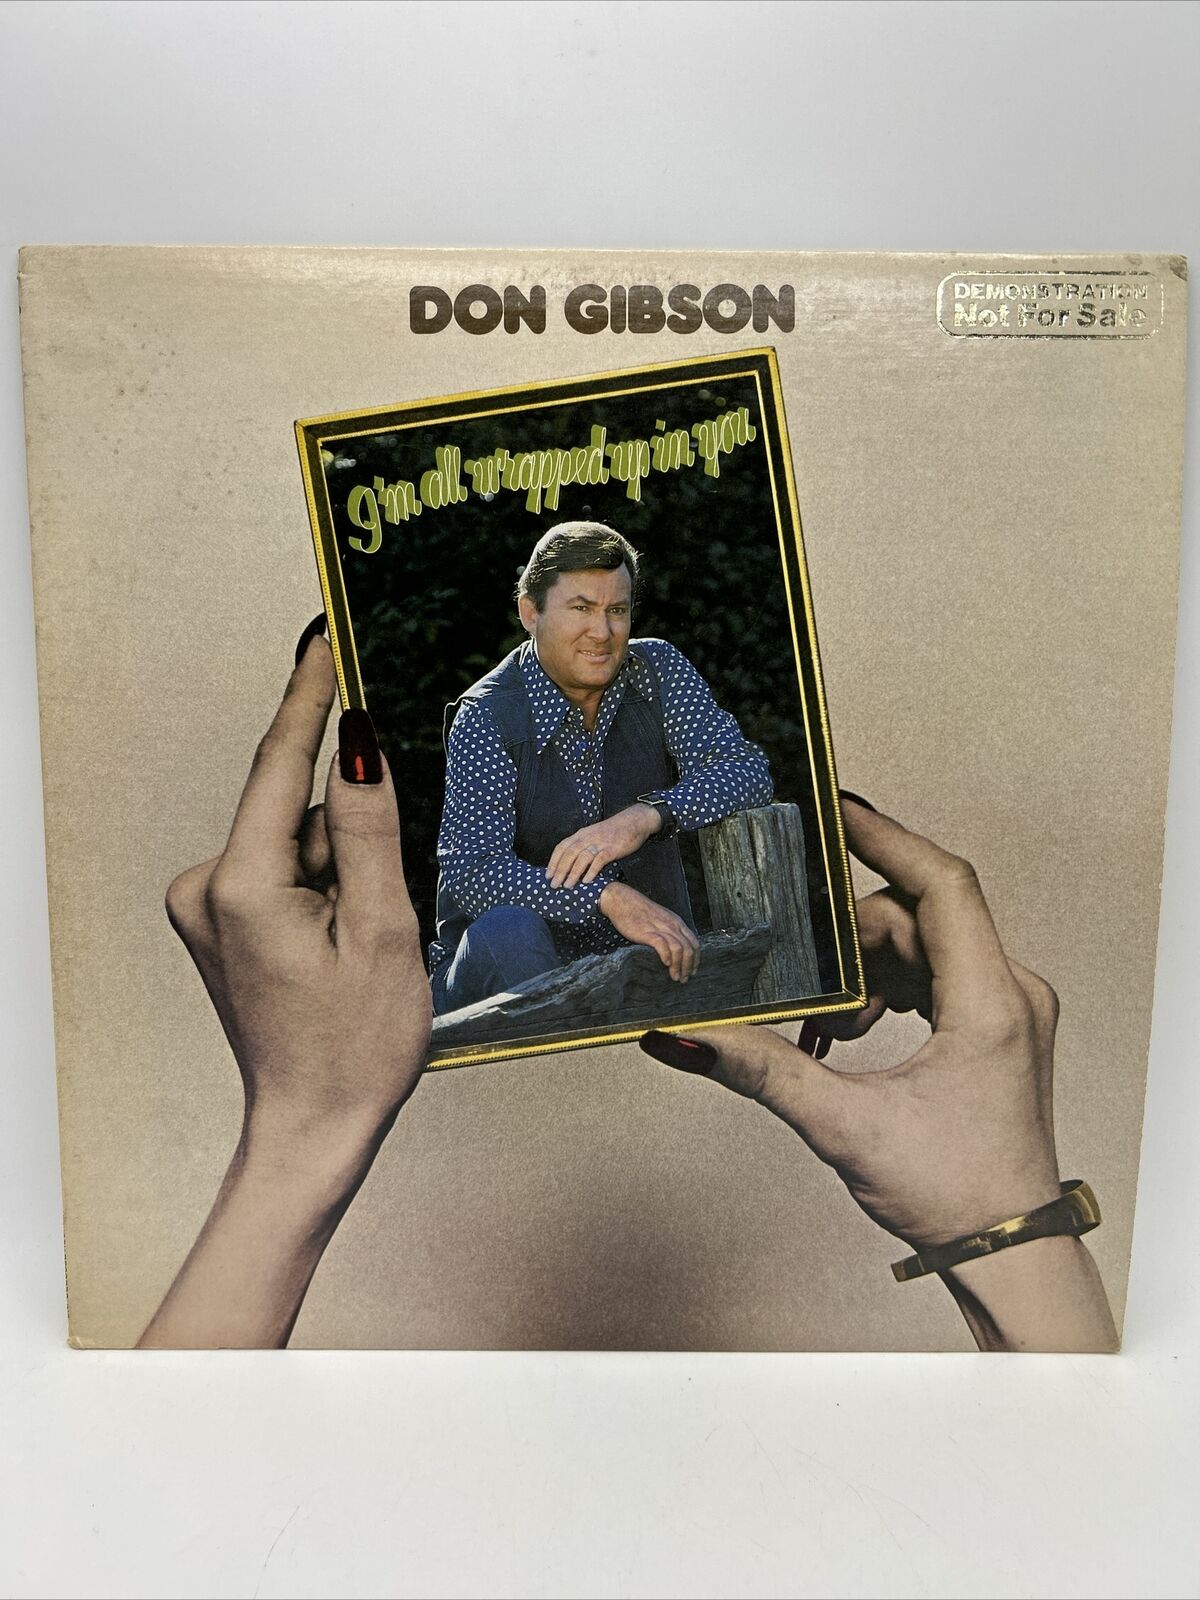 Don Gibson I’m All Wrapped Up In You LP 1976 ABC Records Promo Vinyl AH-44001